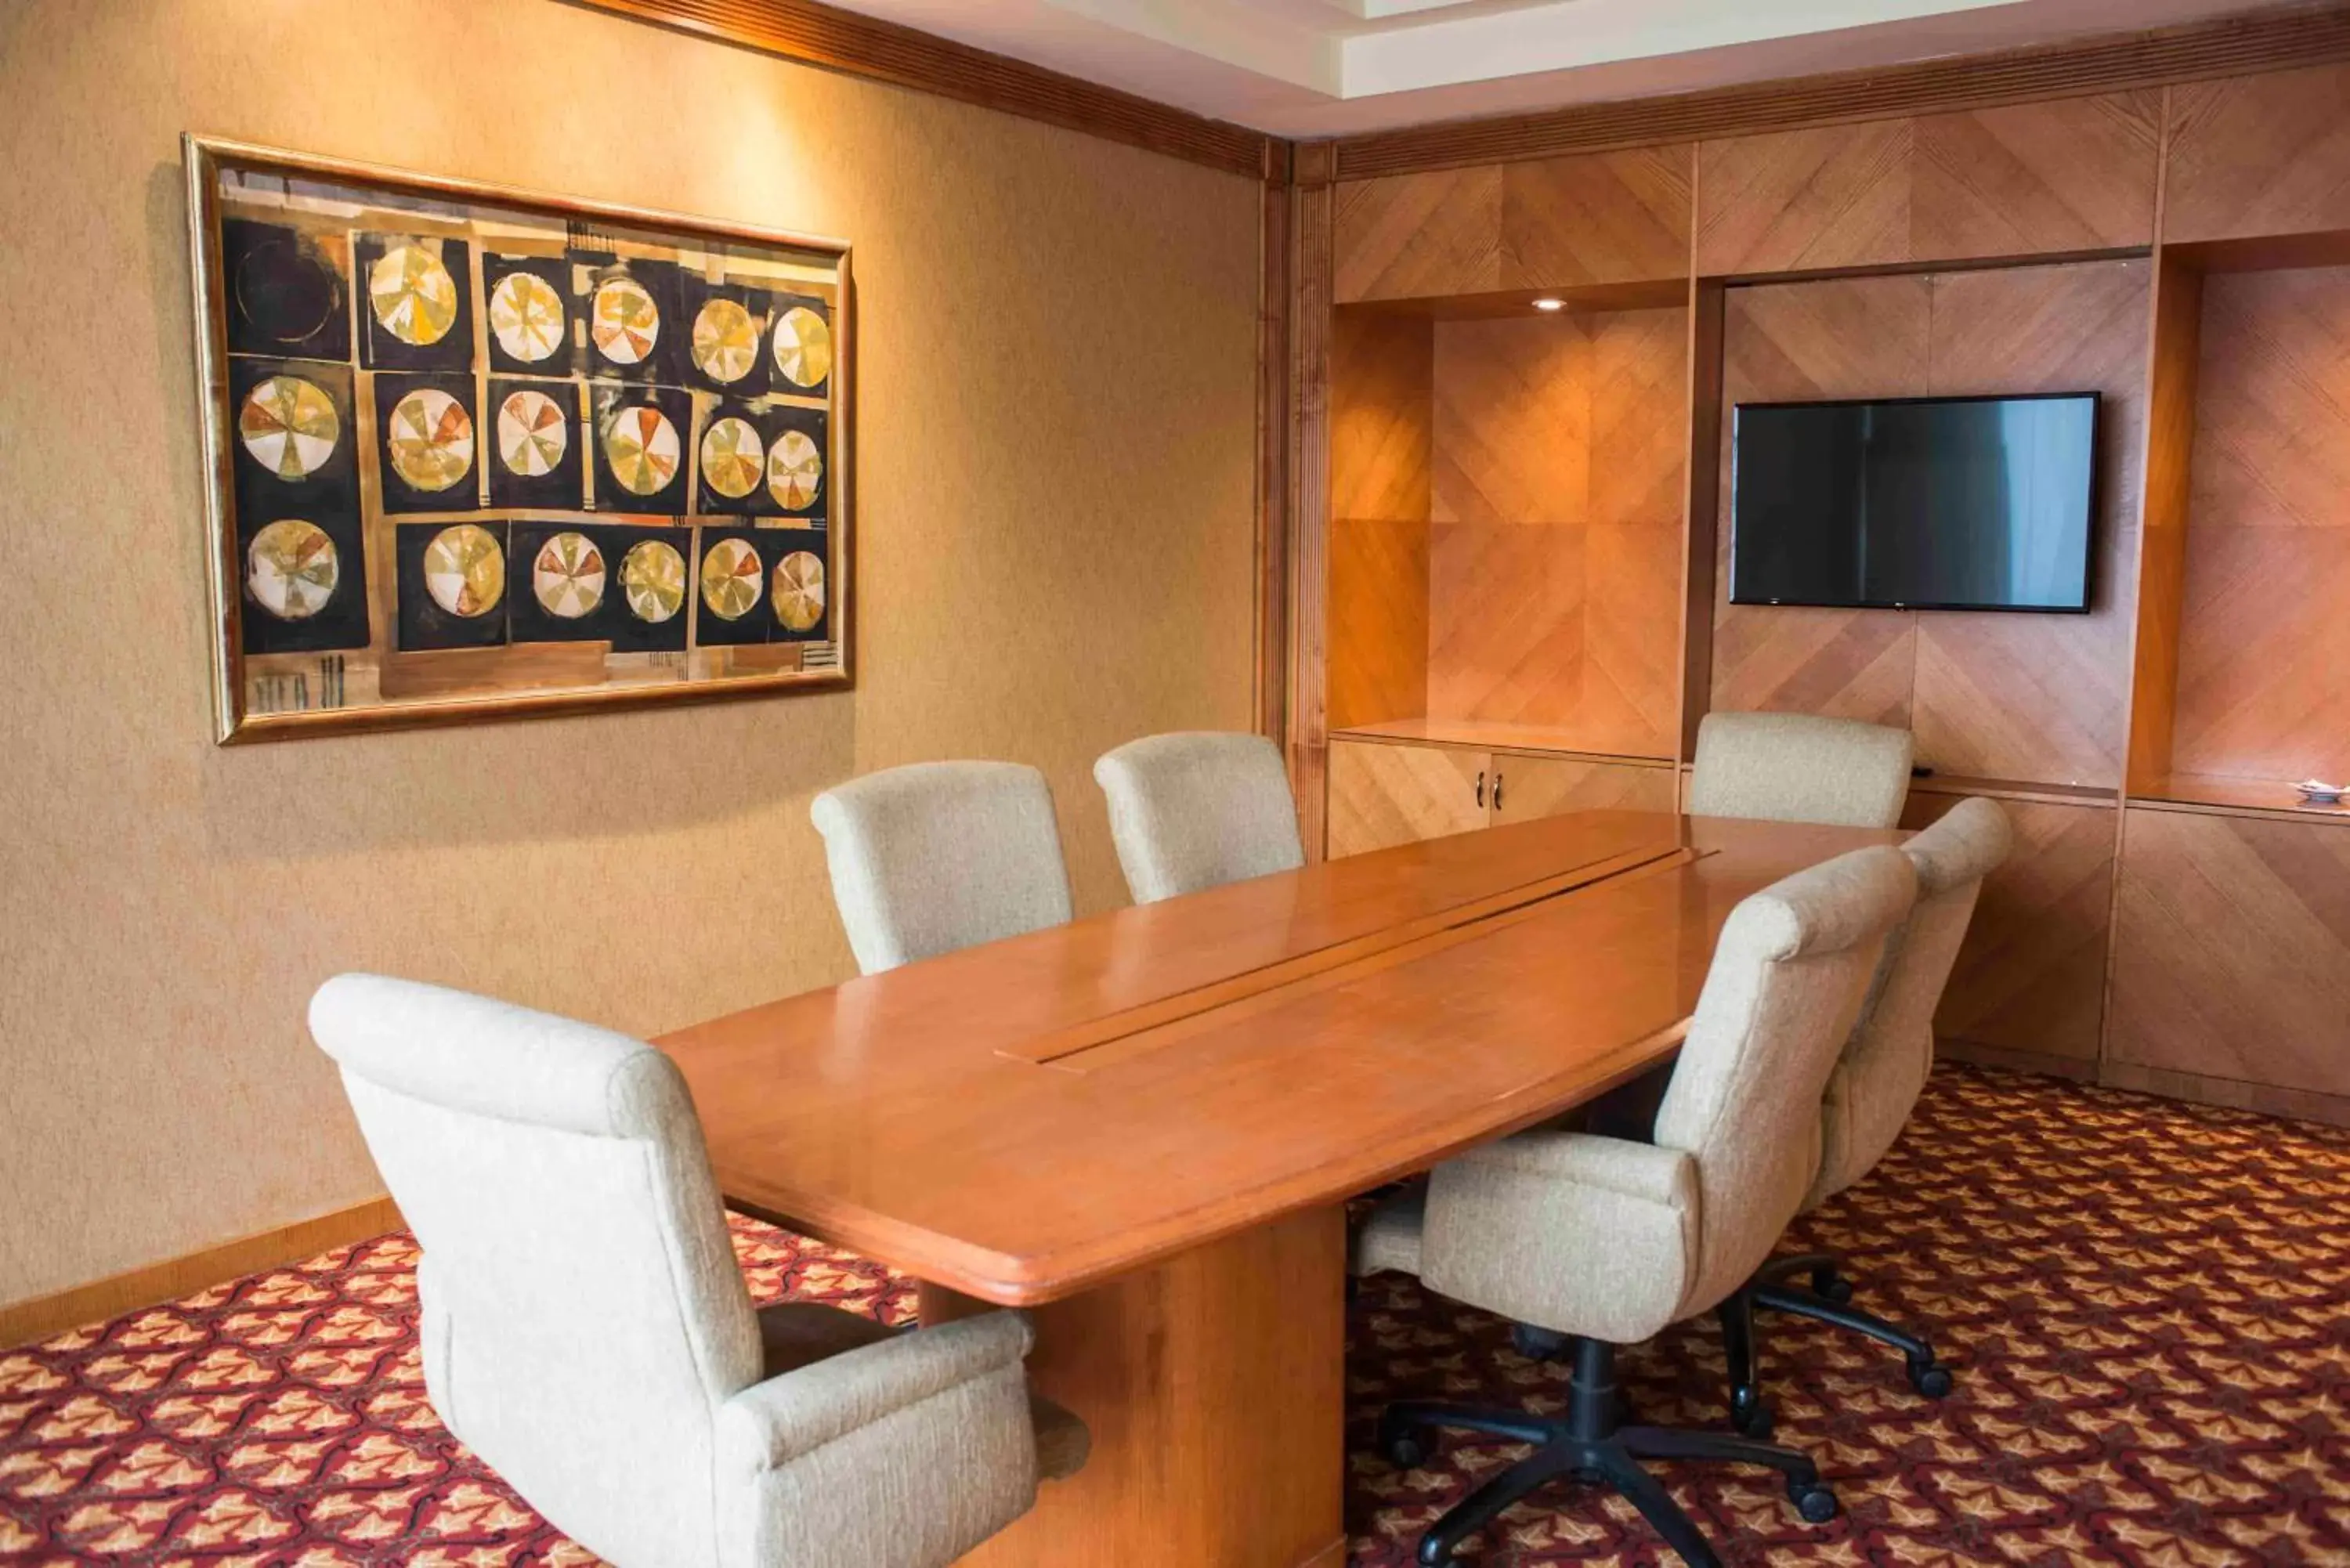 Meeting/conference room in Sheraton Pilar Hotel & Convention Center